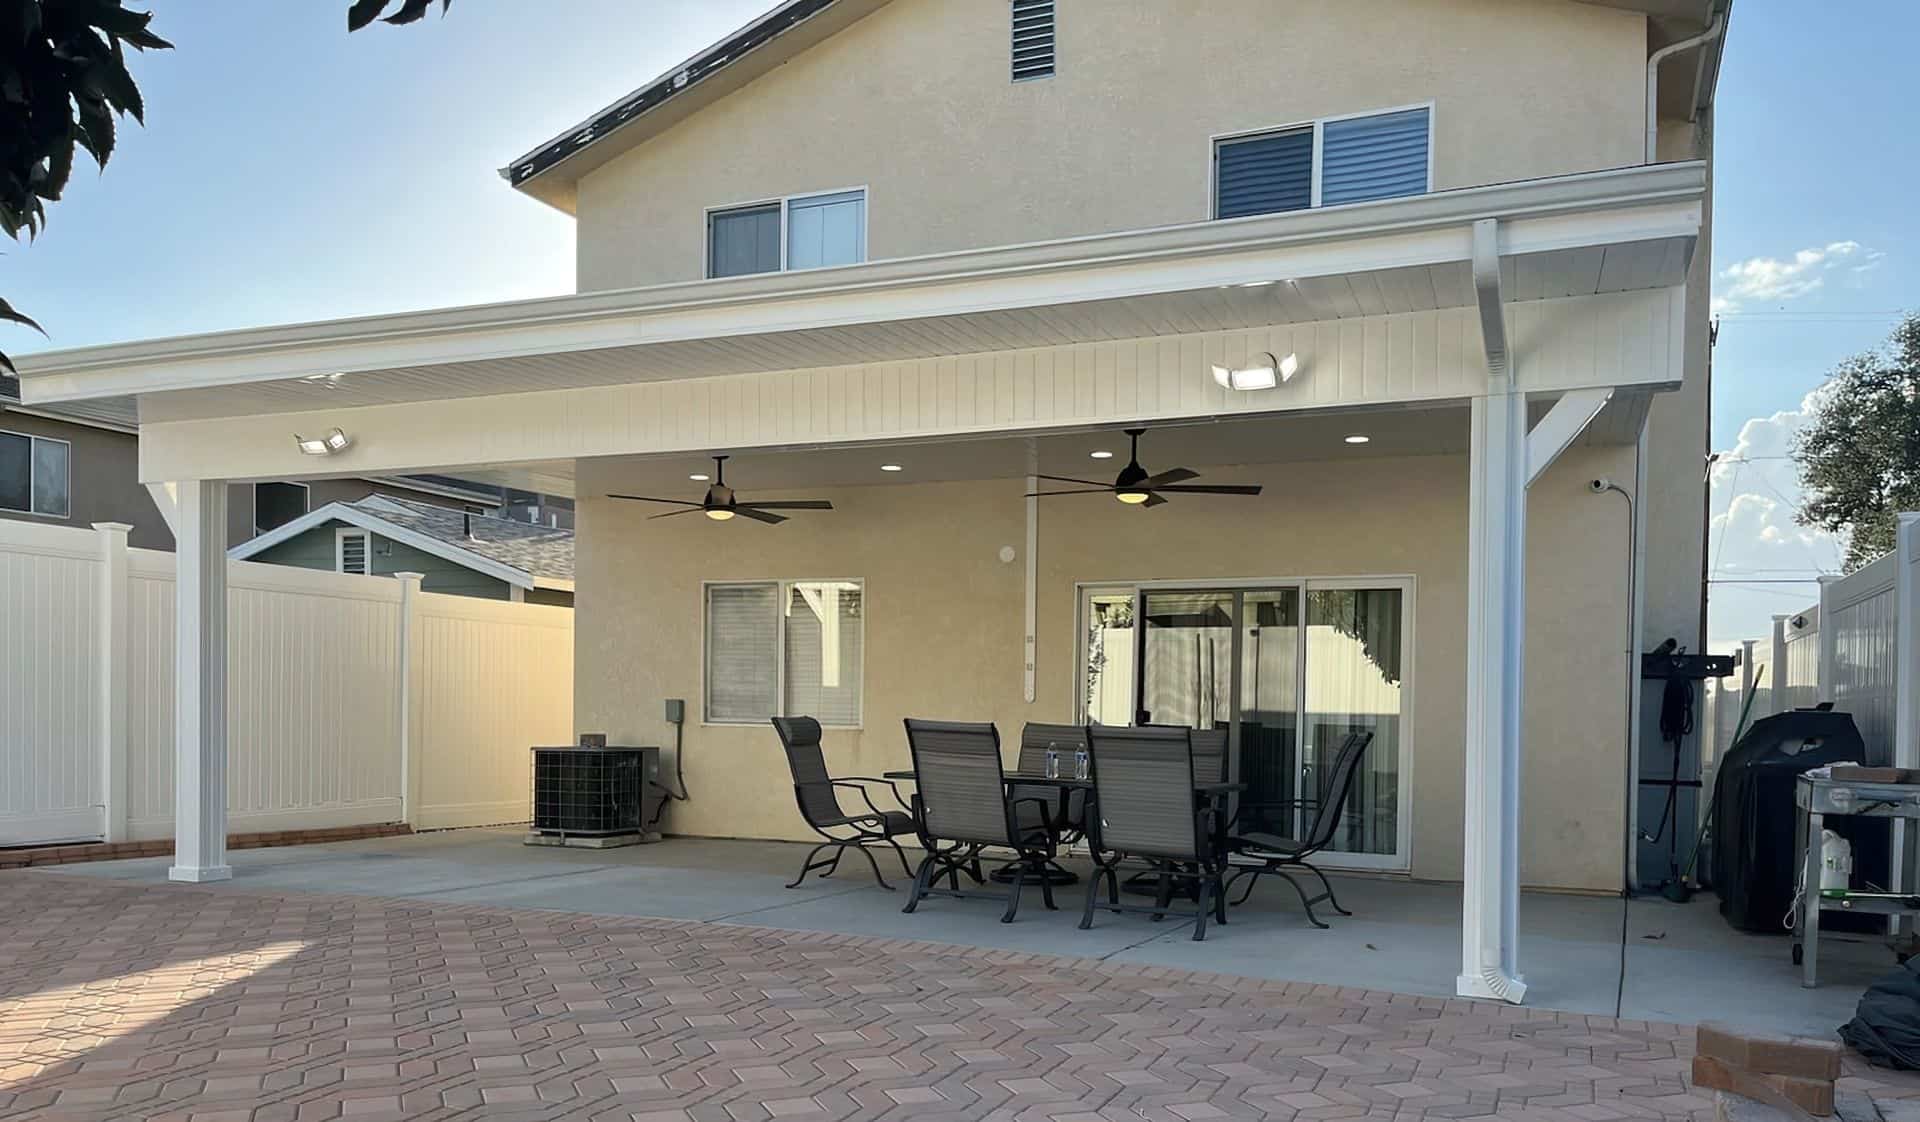 Chic vinyl solid patio cover with fans in the lush front yard with cozy outdoor furniture, and sleek tile flooring.